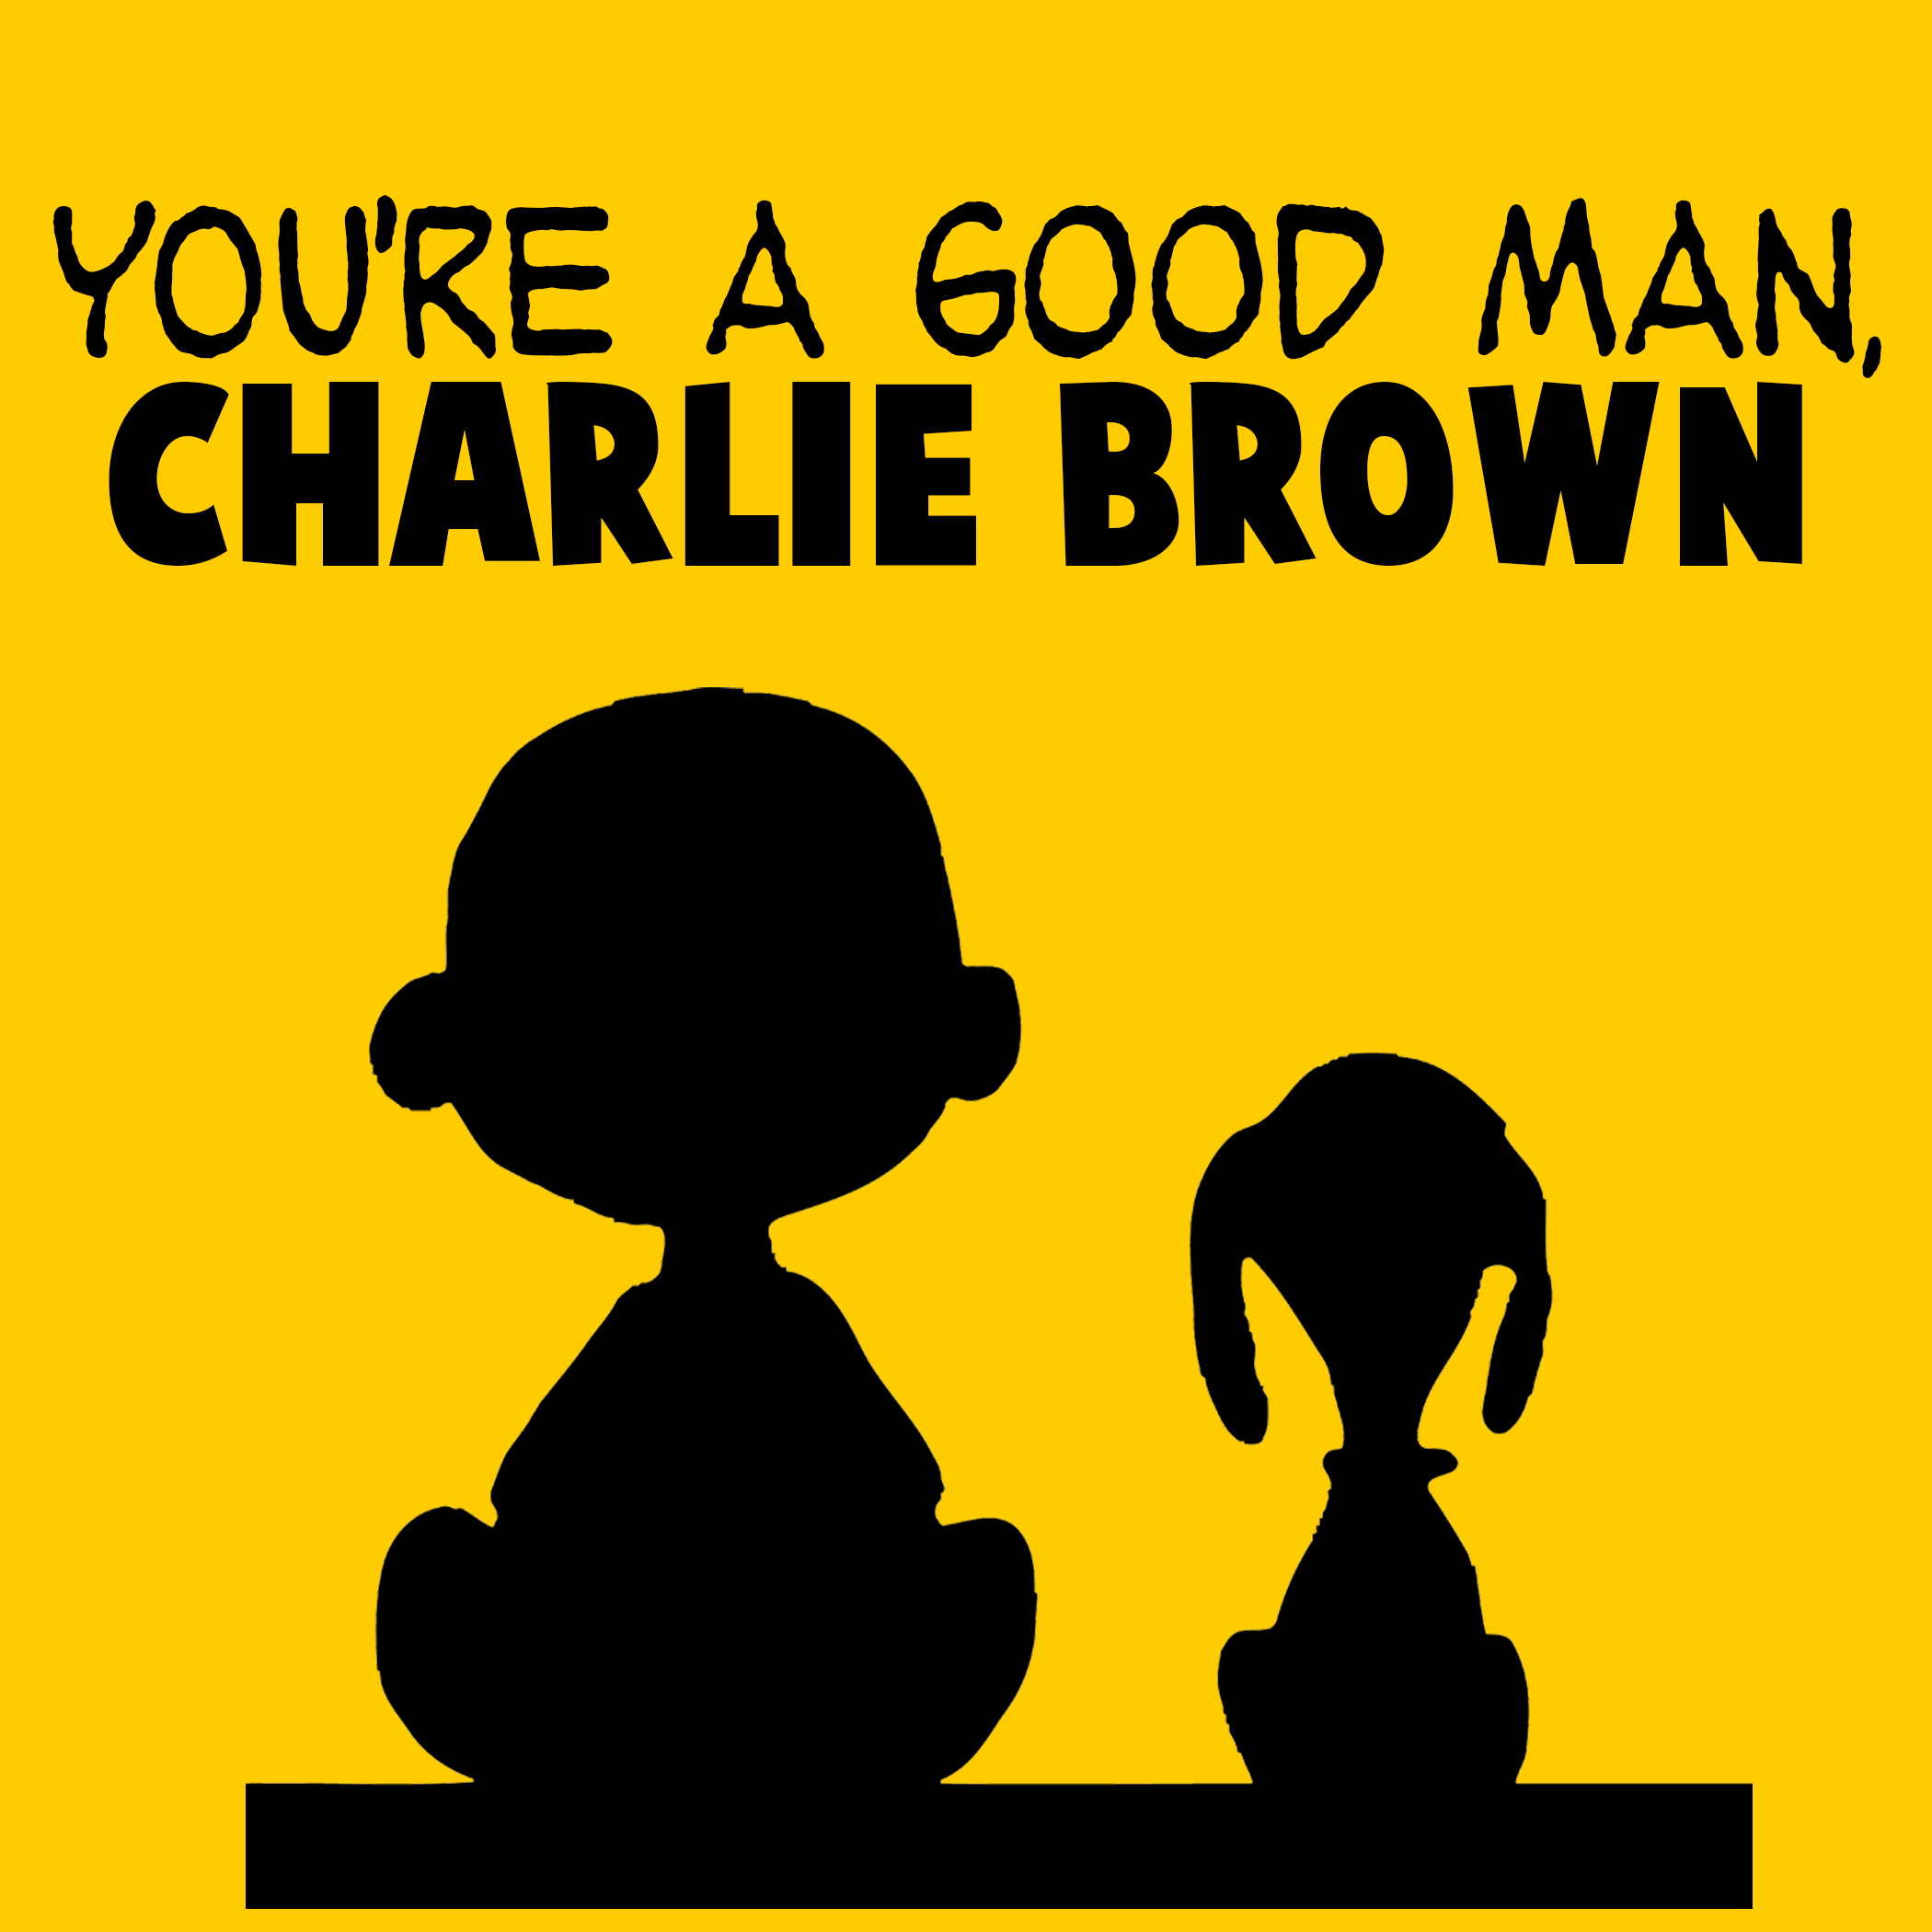 book report from you're a good man charlie brown